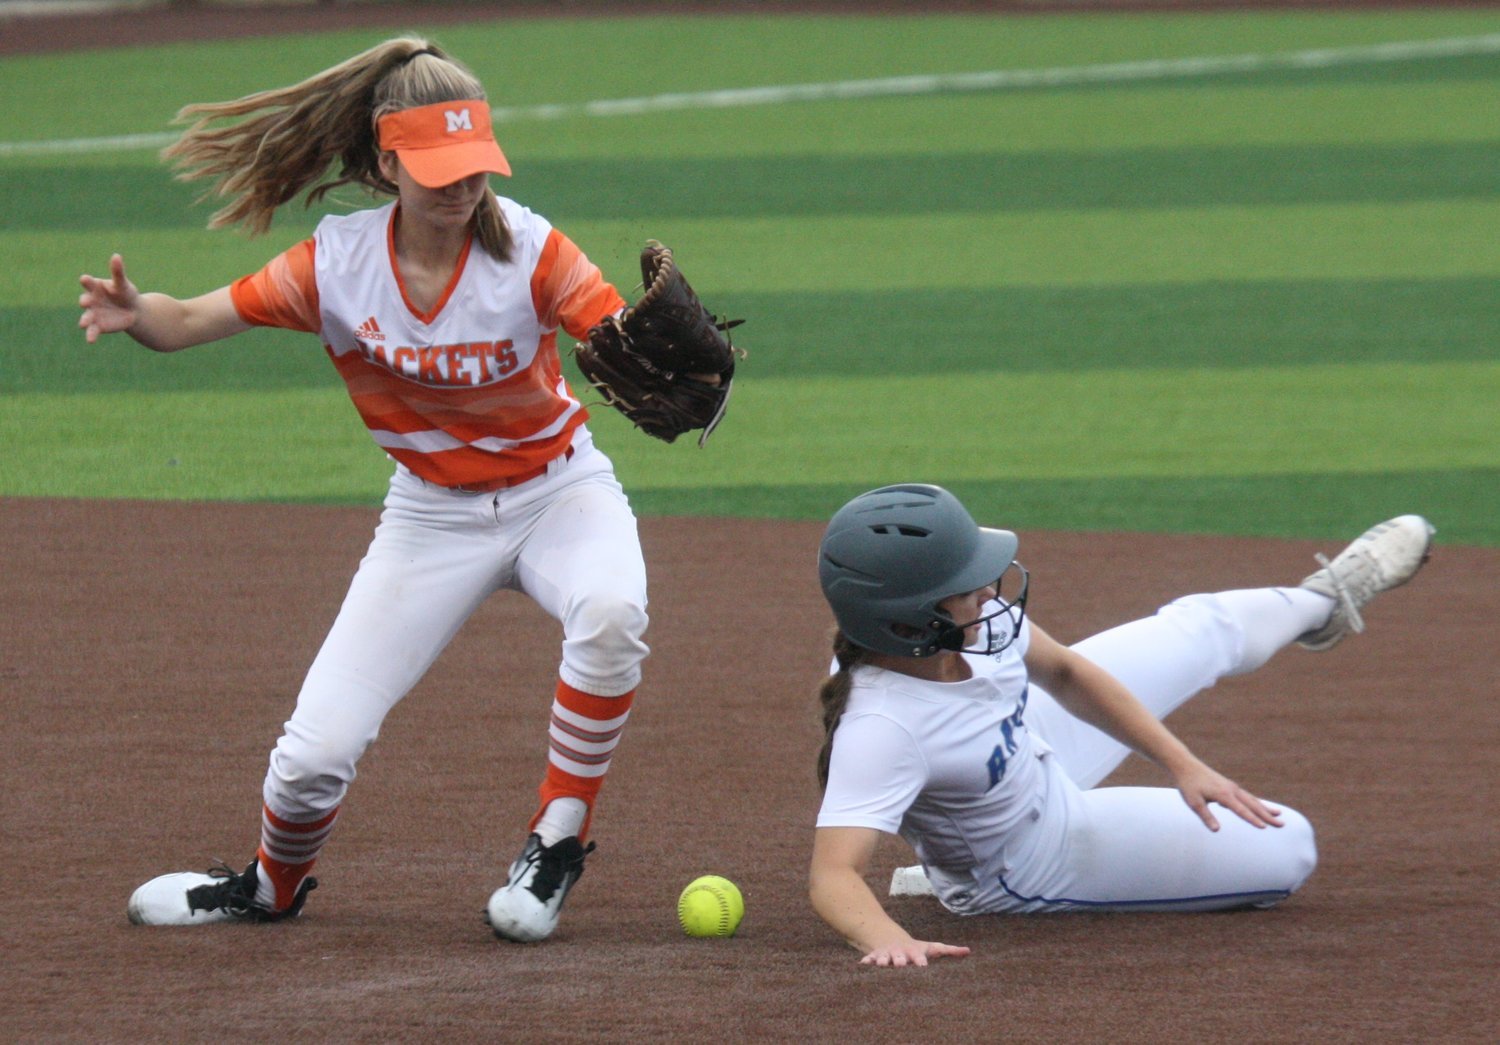 The Ladycats were aggressive on the base paths in their 7-0 defeat of Mineola.